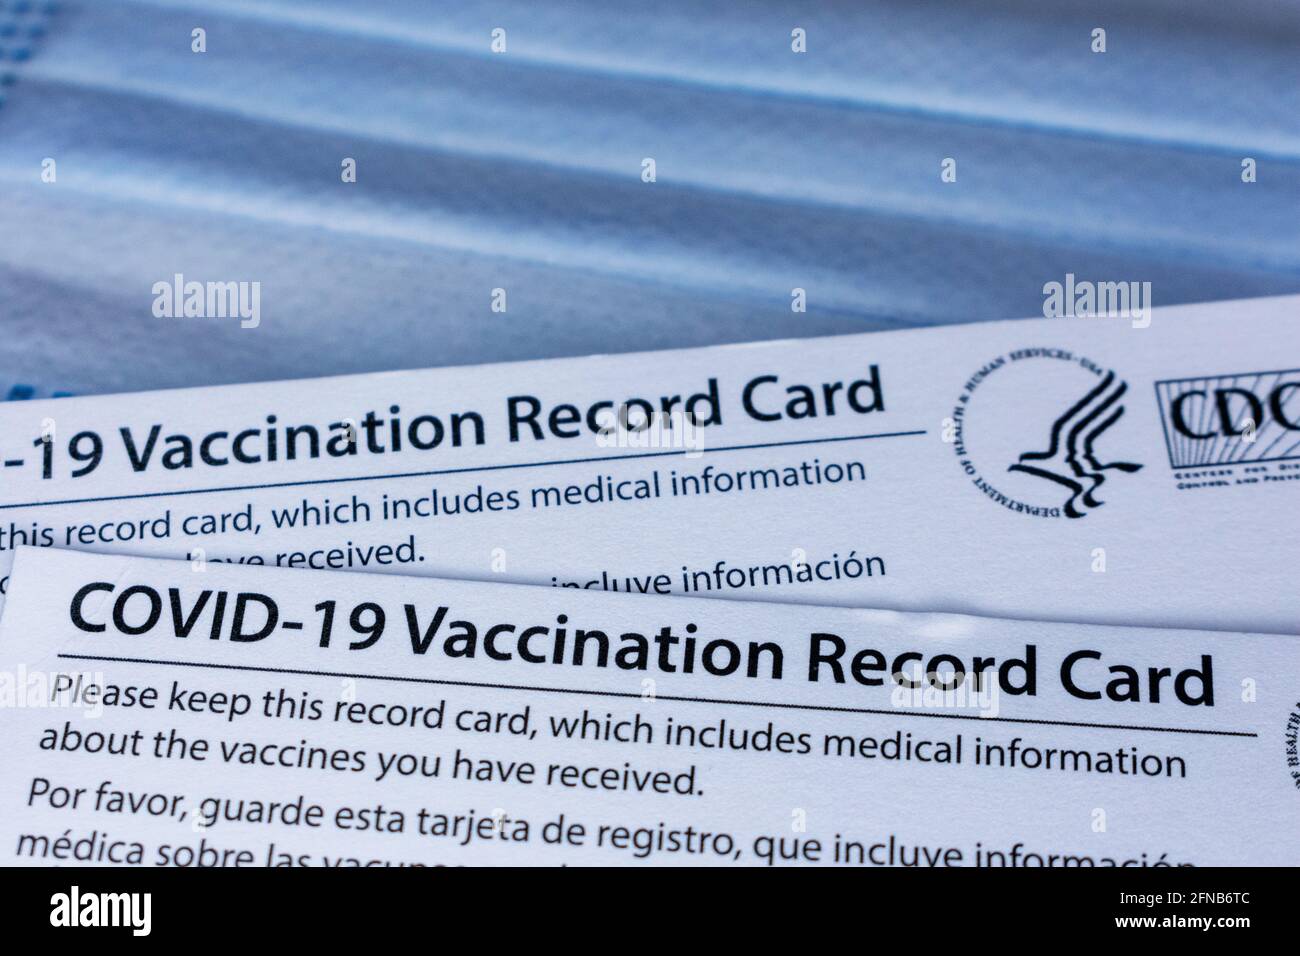 Closeup. Covid-19 vaccination record cards issued by CDC, United States Centers for Disease Control and Prevention, on a blue disposable protective fa Stock Photo